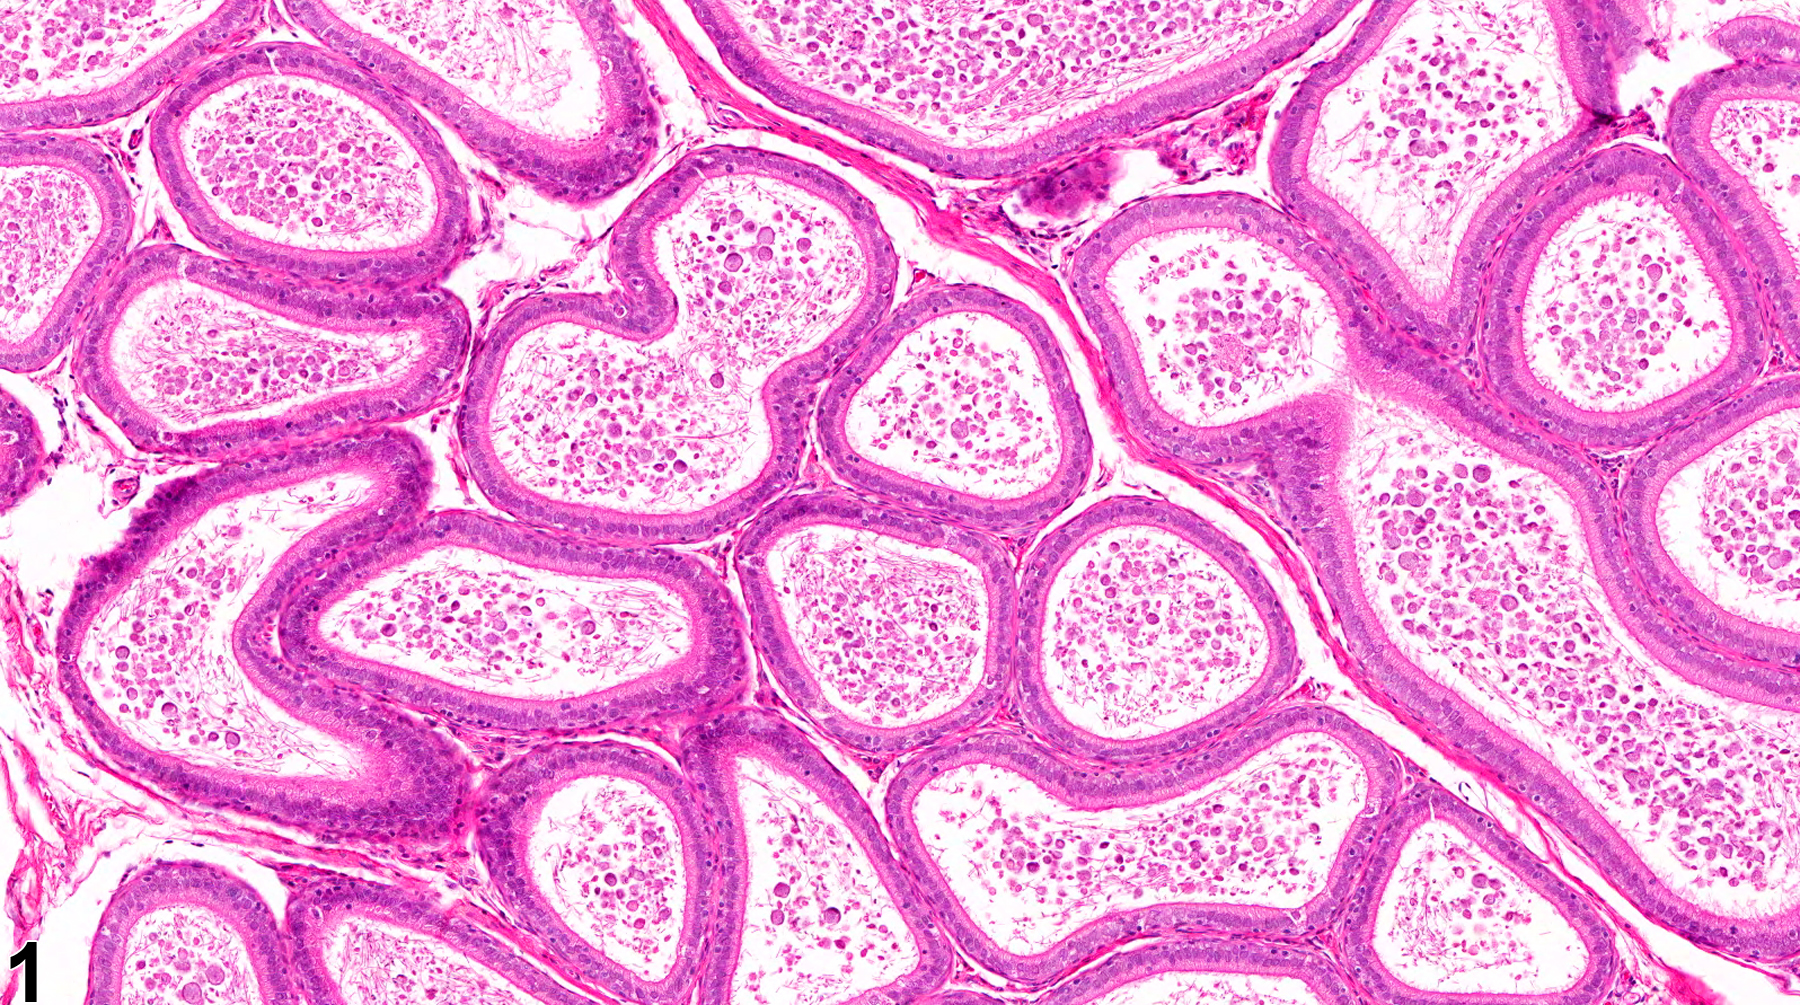 Image of duct exfoliated germ cell in the epididymis from a male F344/N rat in a subchronic study